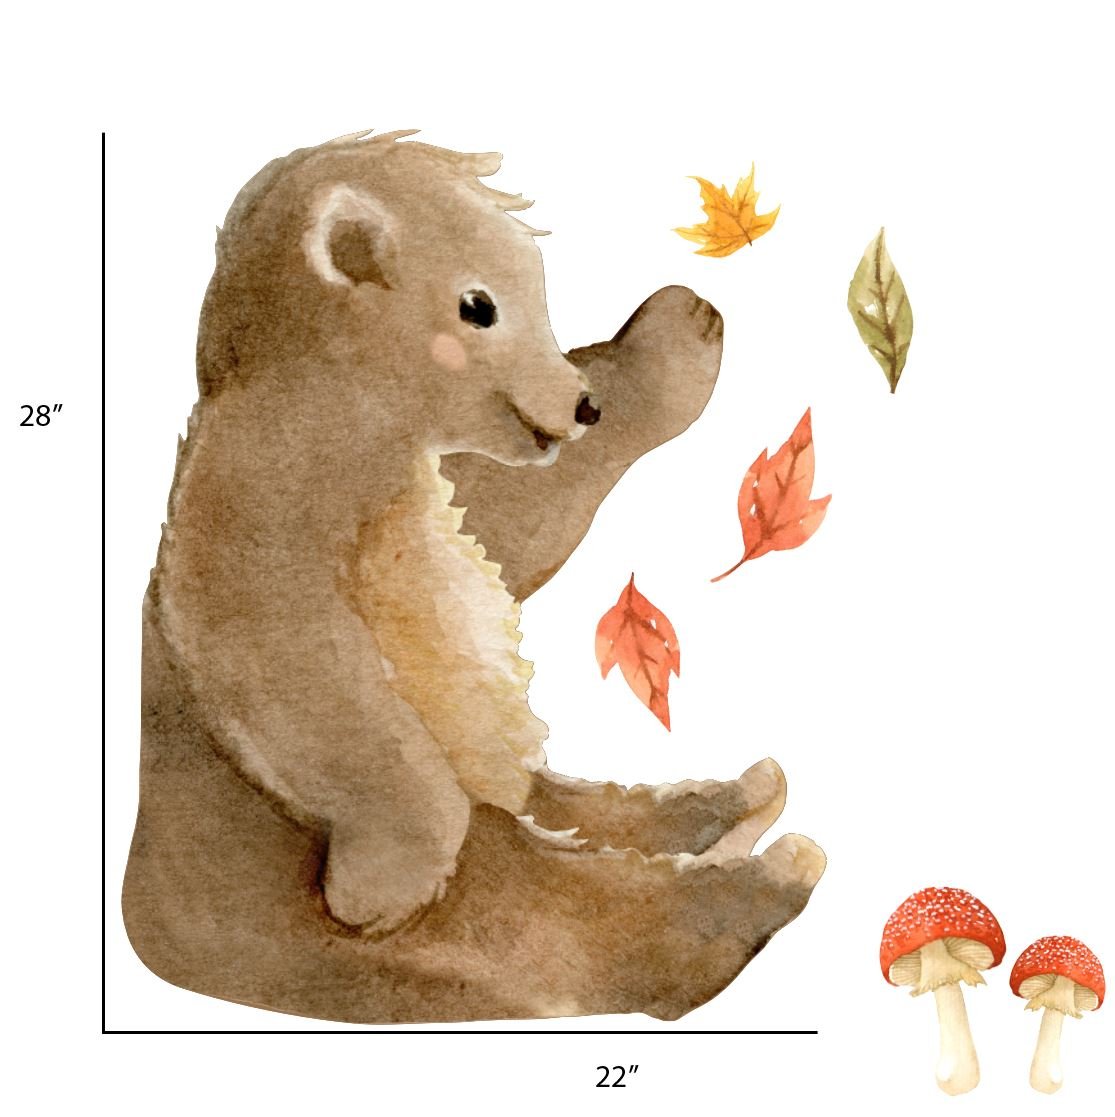 Woodland Nursery Removable Wall Decals | Sitting Bear - wall decals - Picture Perfect Decals